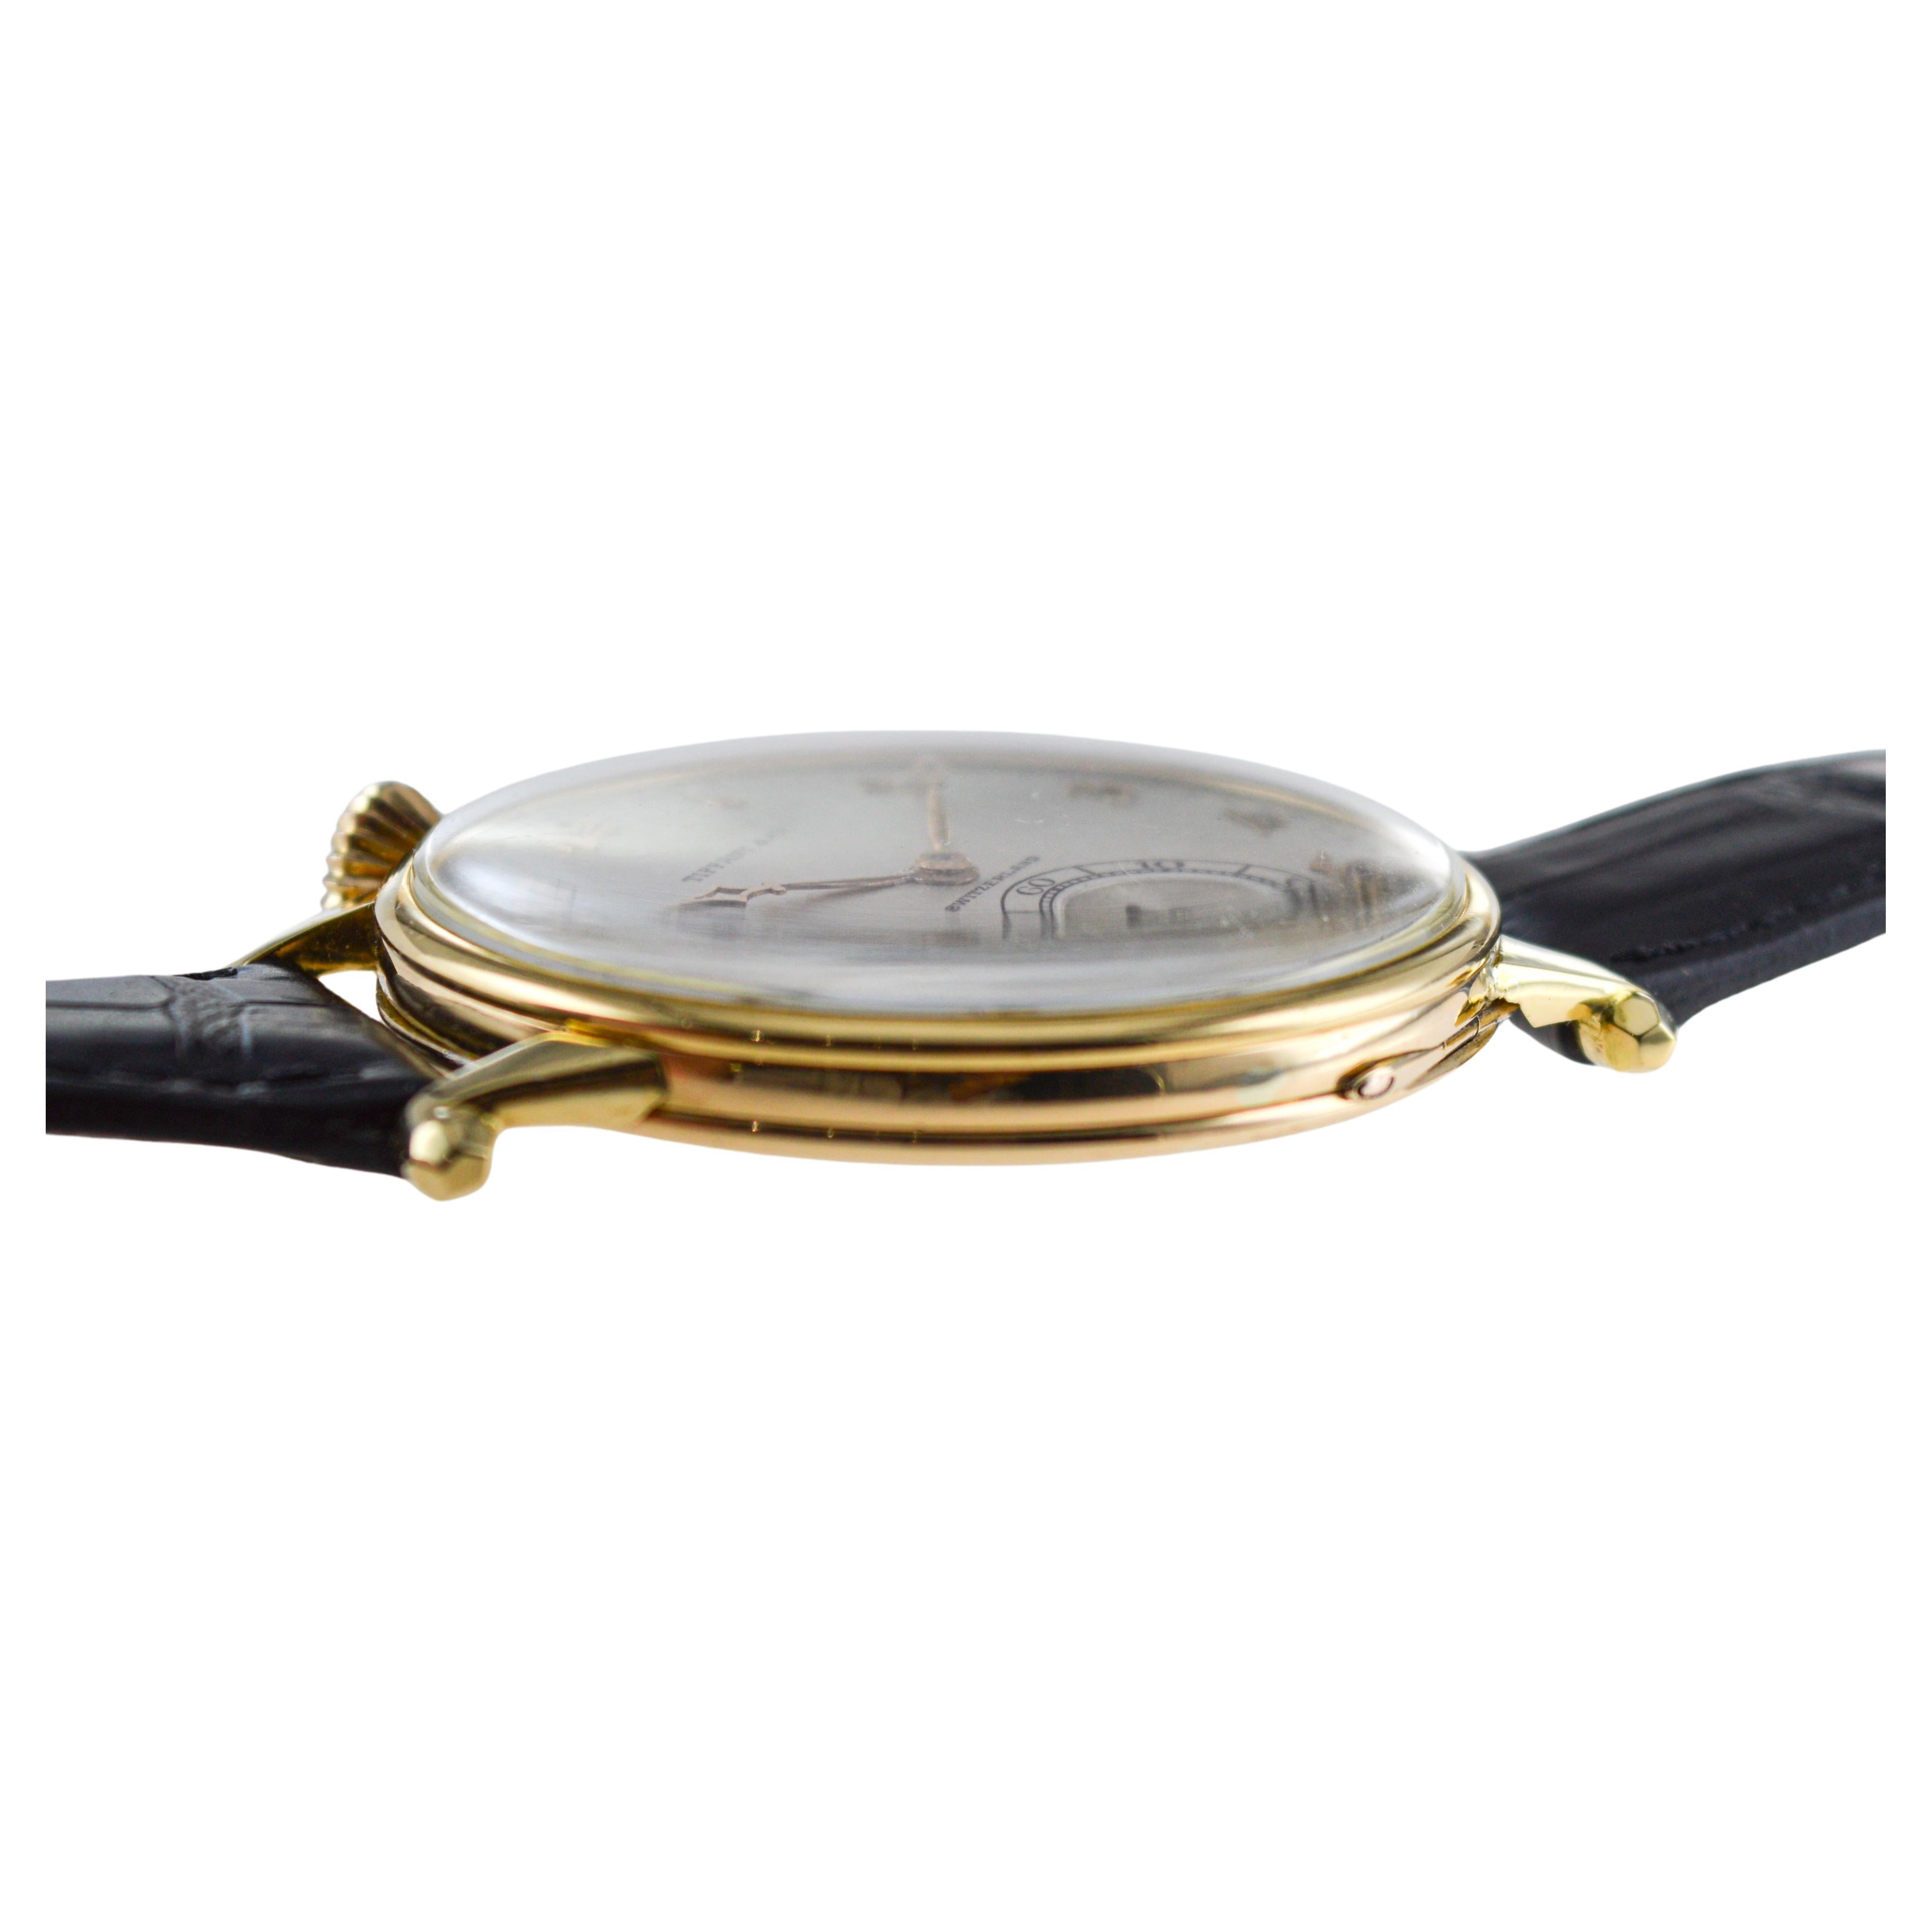 Agassiz 18Kt. Gold Oversized Watch for Tiffany & Co. Stern Freres Dial 1920's For Sale 7